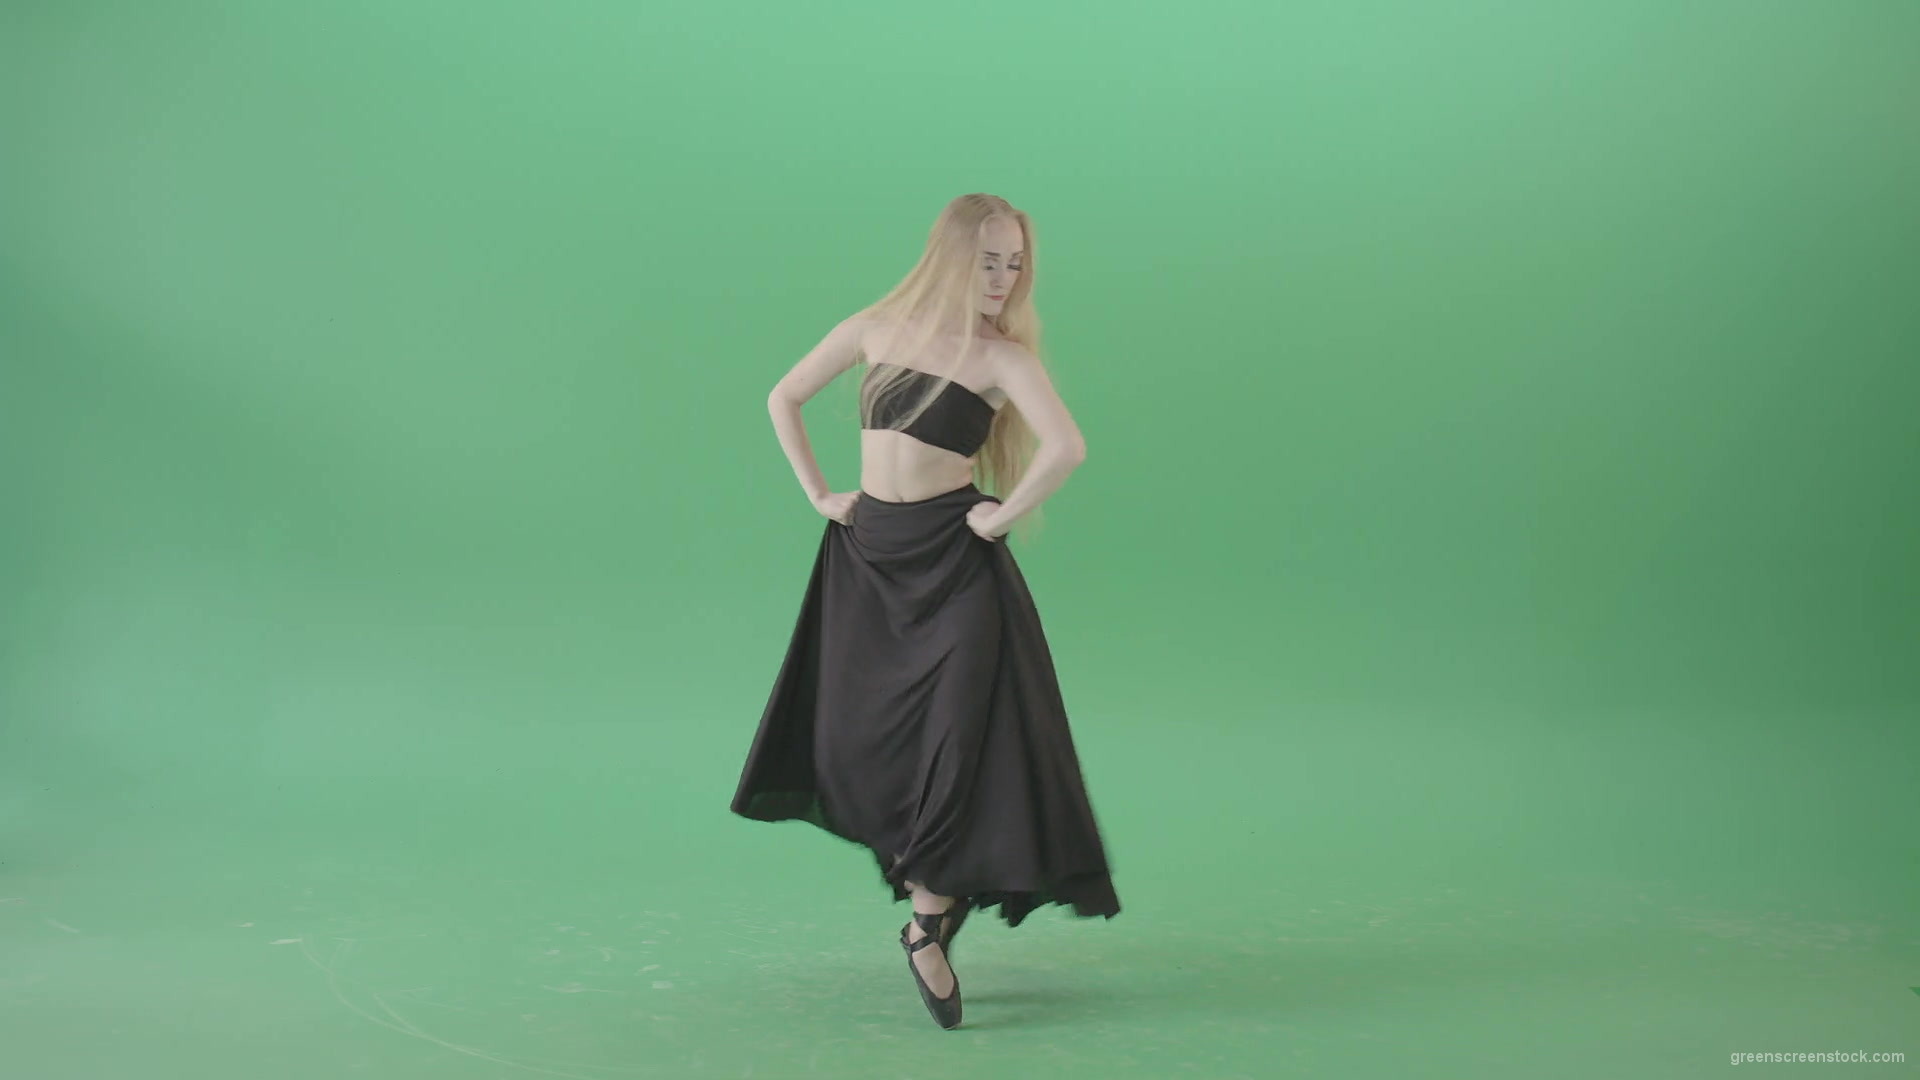 Hot-passion-ballet-girl-in-black-dress-dancing-on-green-screen-4K-Video-Footage-1920_007 Green Screen Stock